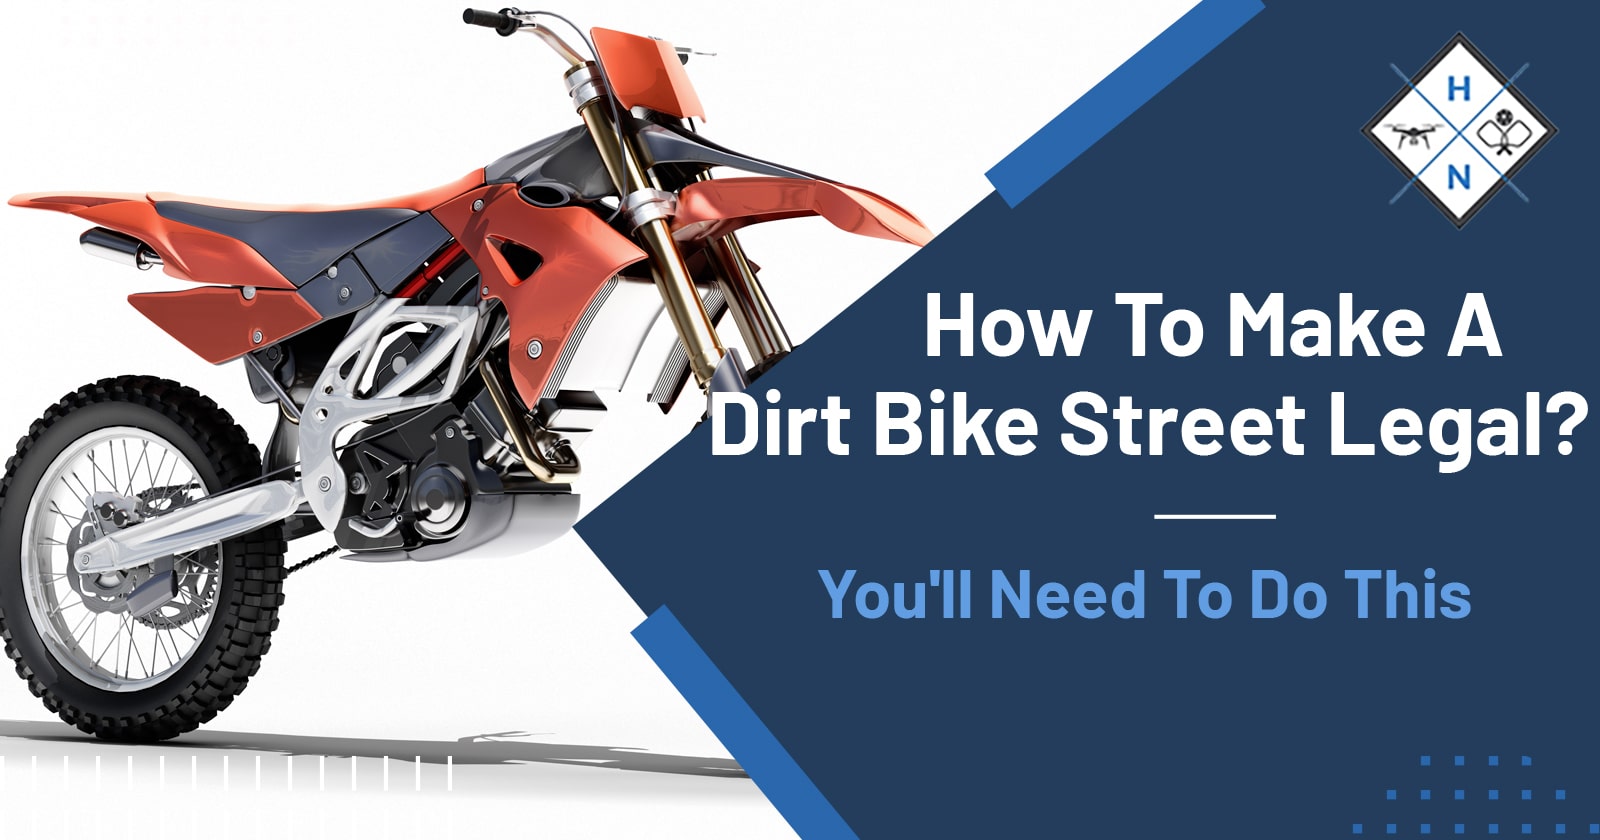 How to Make a Dirt Bike Street Legal? You’ll Need To Do This